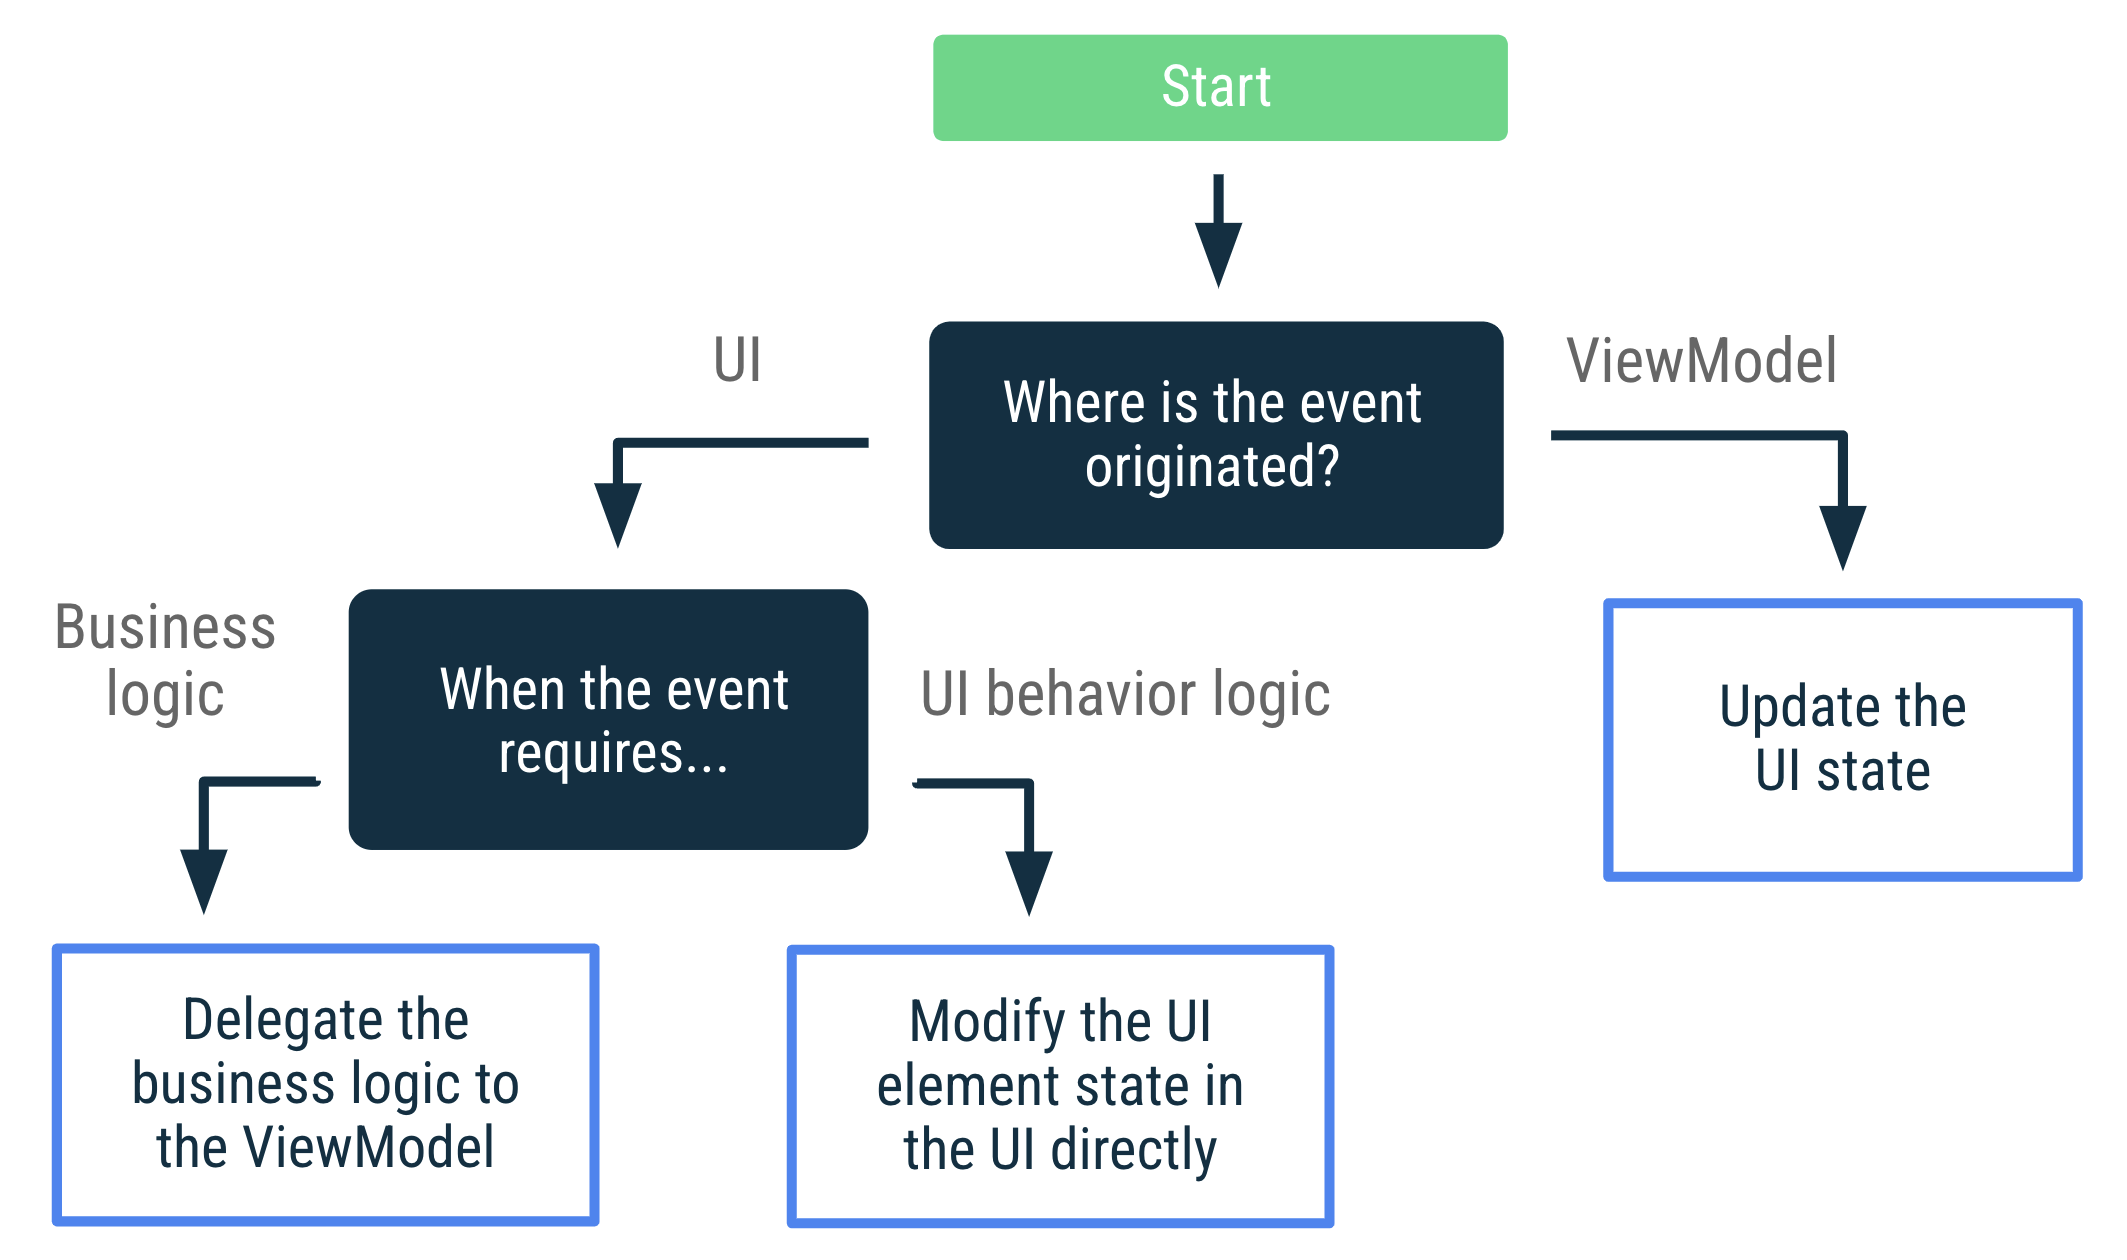 If the event originated in the ViewModel, then update the UI state. If
    the event originated in the UI and requires business logic, then delegate
    the business logic to the ViewModel. If the event originated in the UI and
    requires UI behavior logic, then modify the UI element state directly in the
    UI.